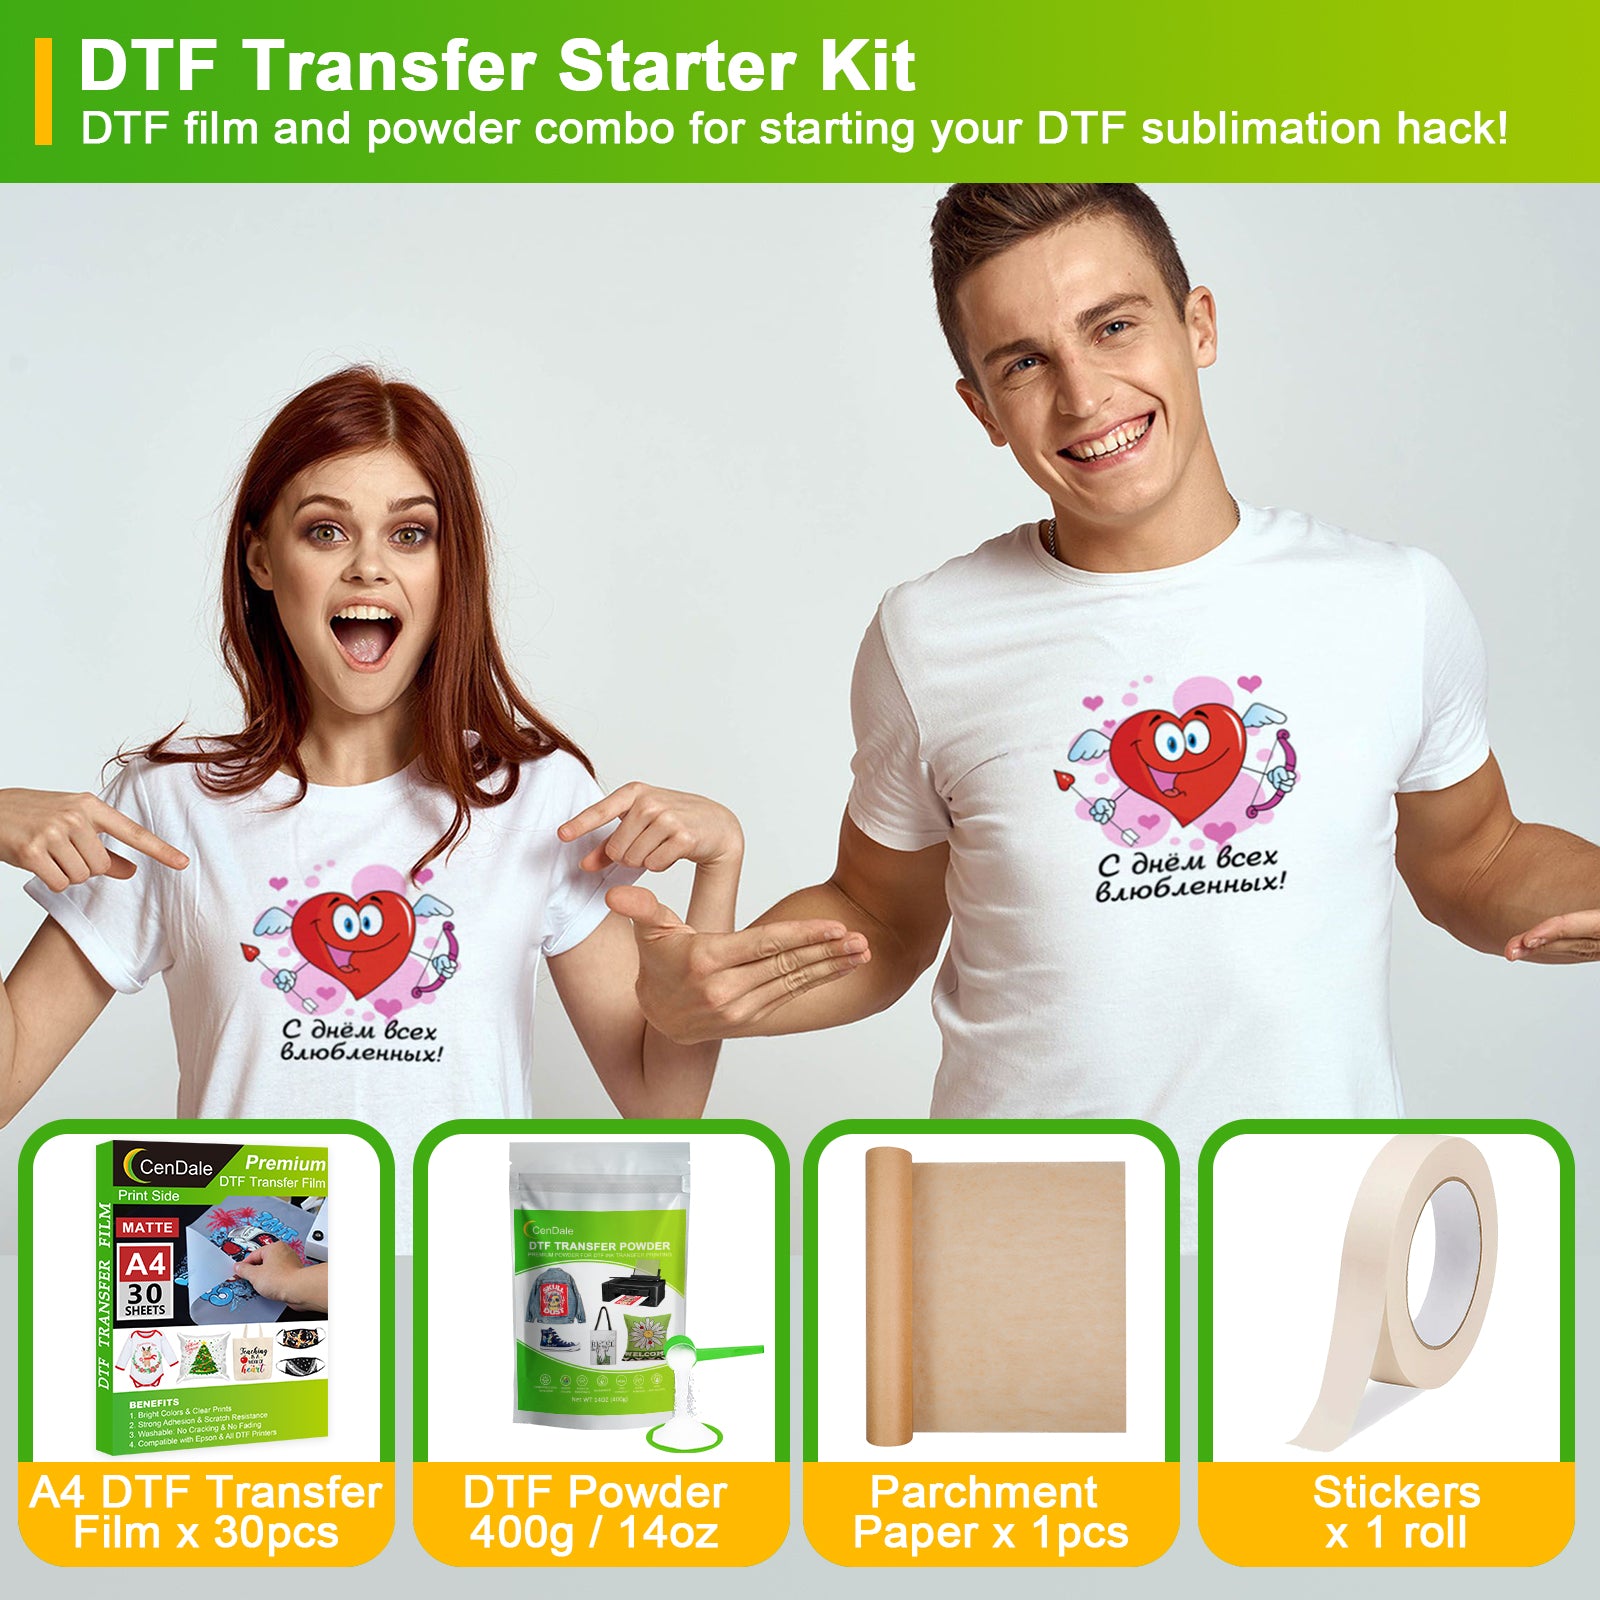 SlickLab A4 DTF Transfer Film and DTF Powder Bundle - 50 Sheets and 500g DTF Transfer Powder for Sublimation - 8.3 x 11.7 Inches - Double-Sided DTF